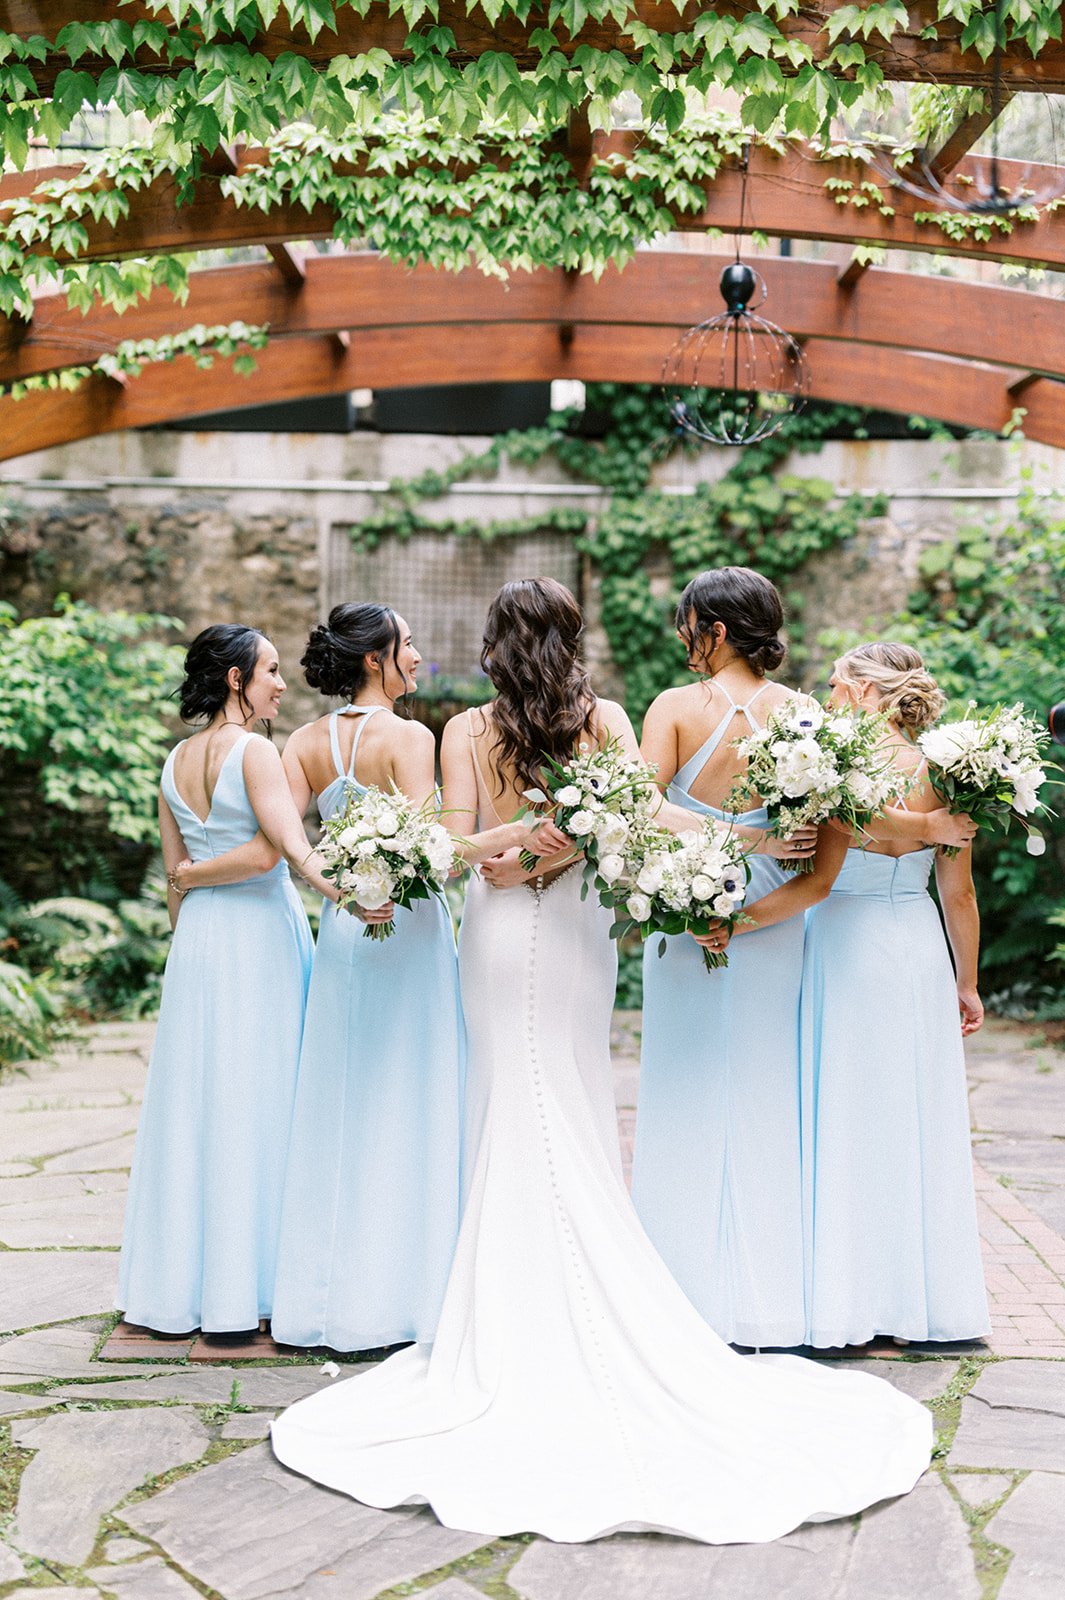 Bride and bridesmaids crossing arms across backs with white bouquets under greenery canopy